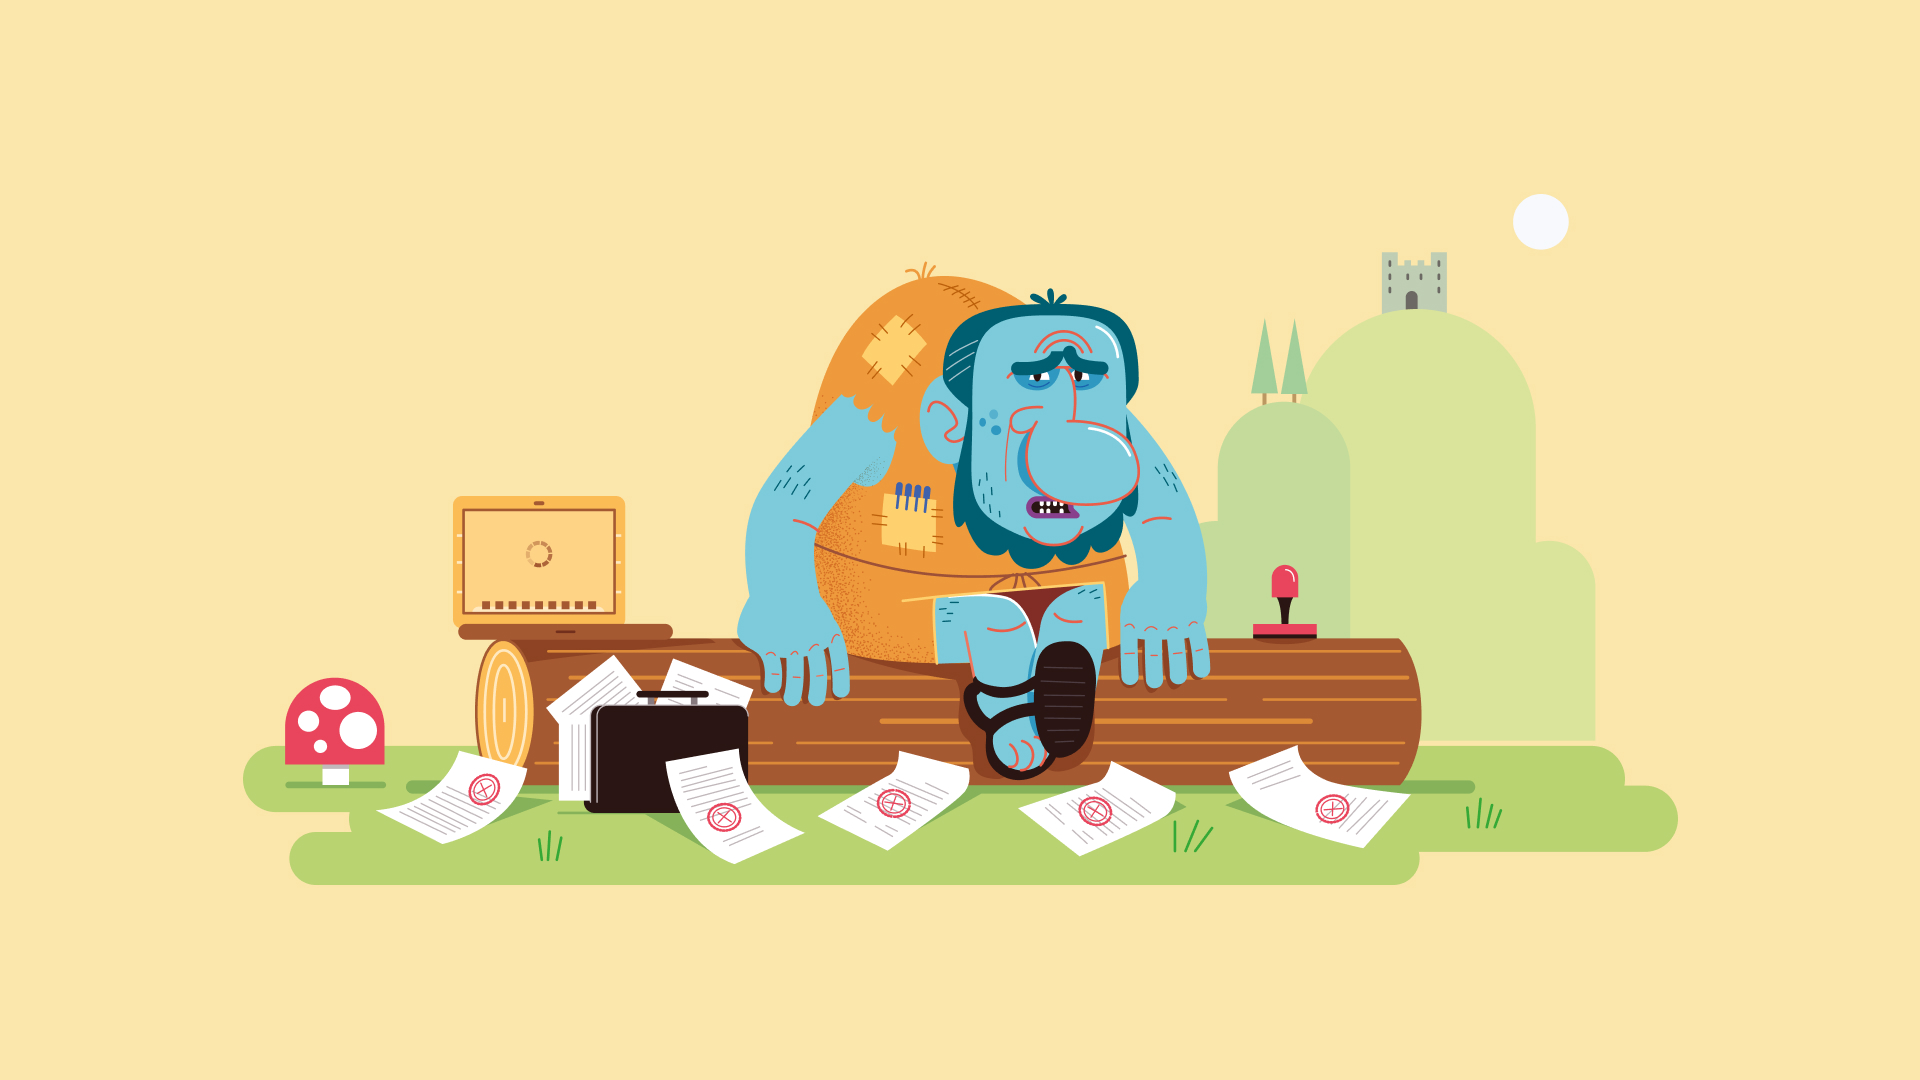 The Misunderstood Troll - A story about collaboration, communication and visibility in a regulated software organizations